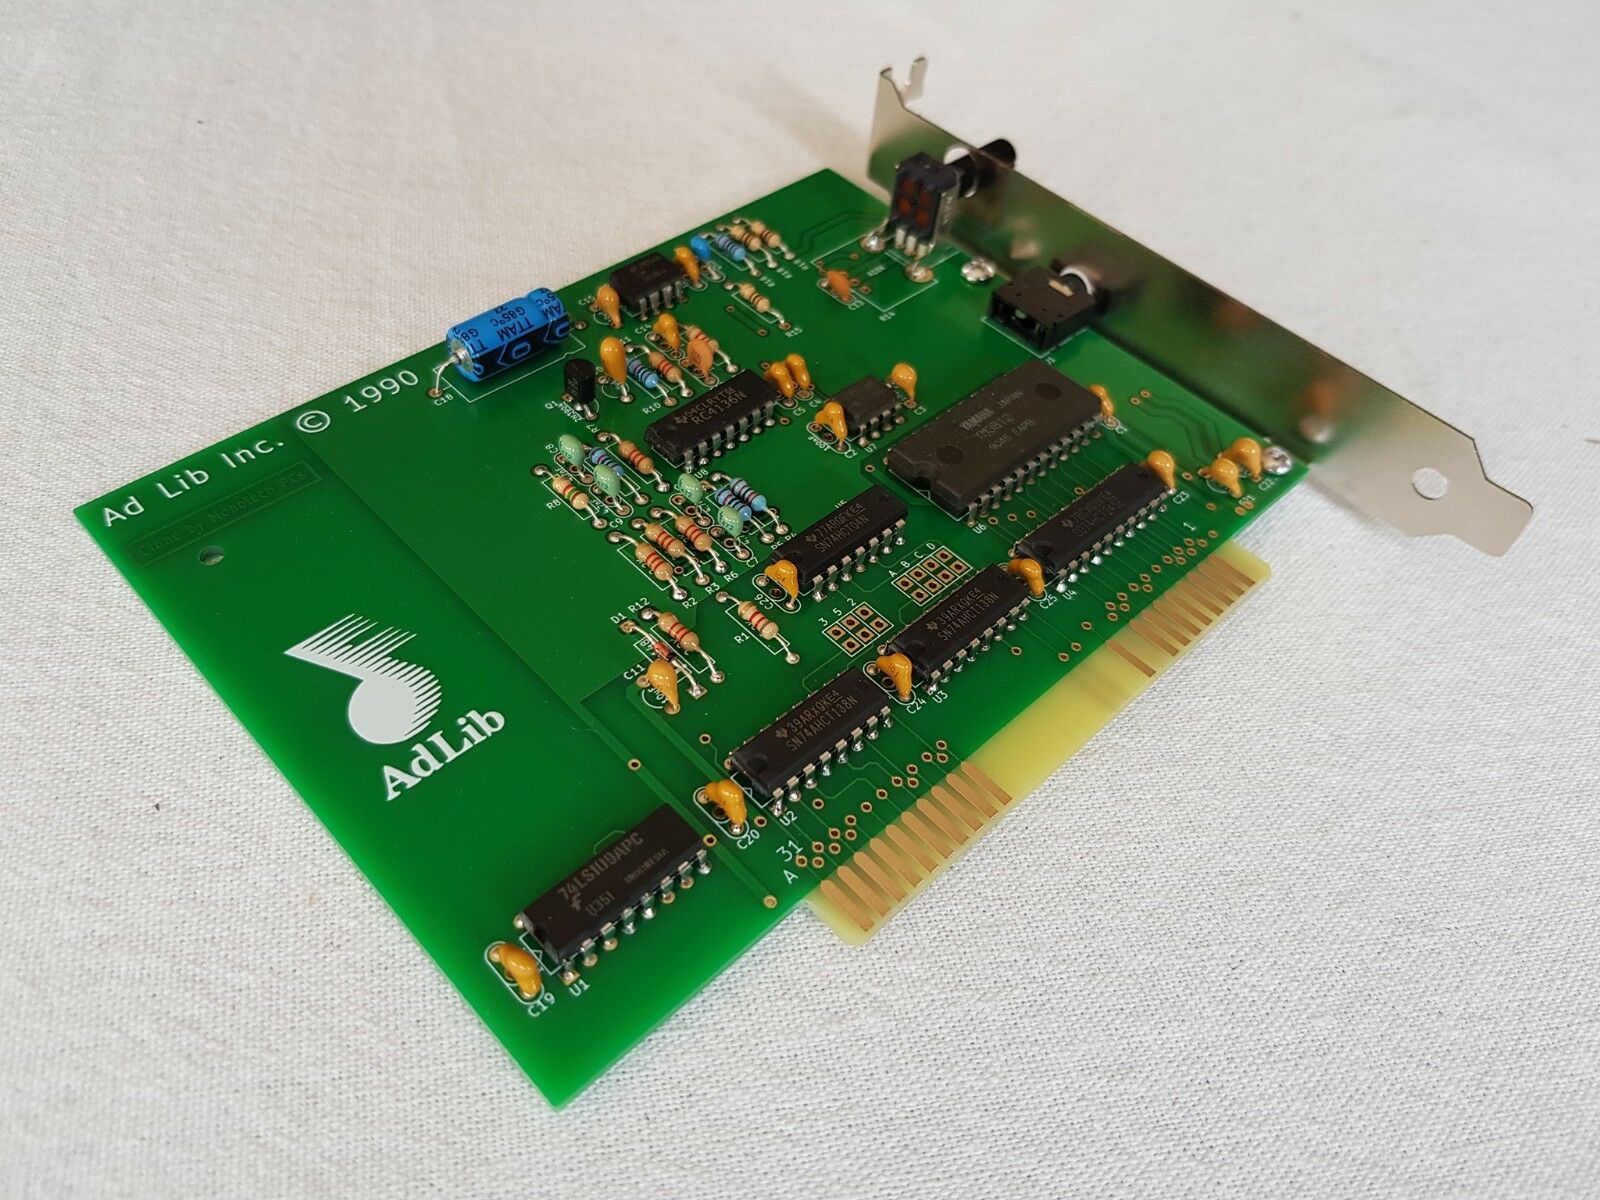 Adlib Sound Card - For Classic Dos Game Music!